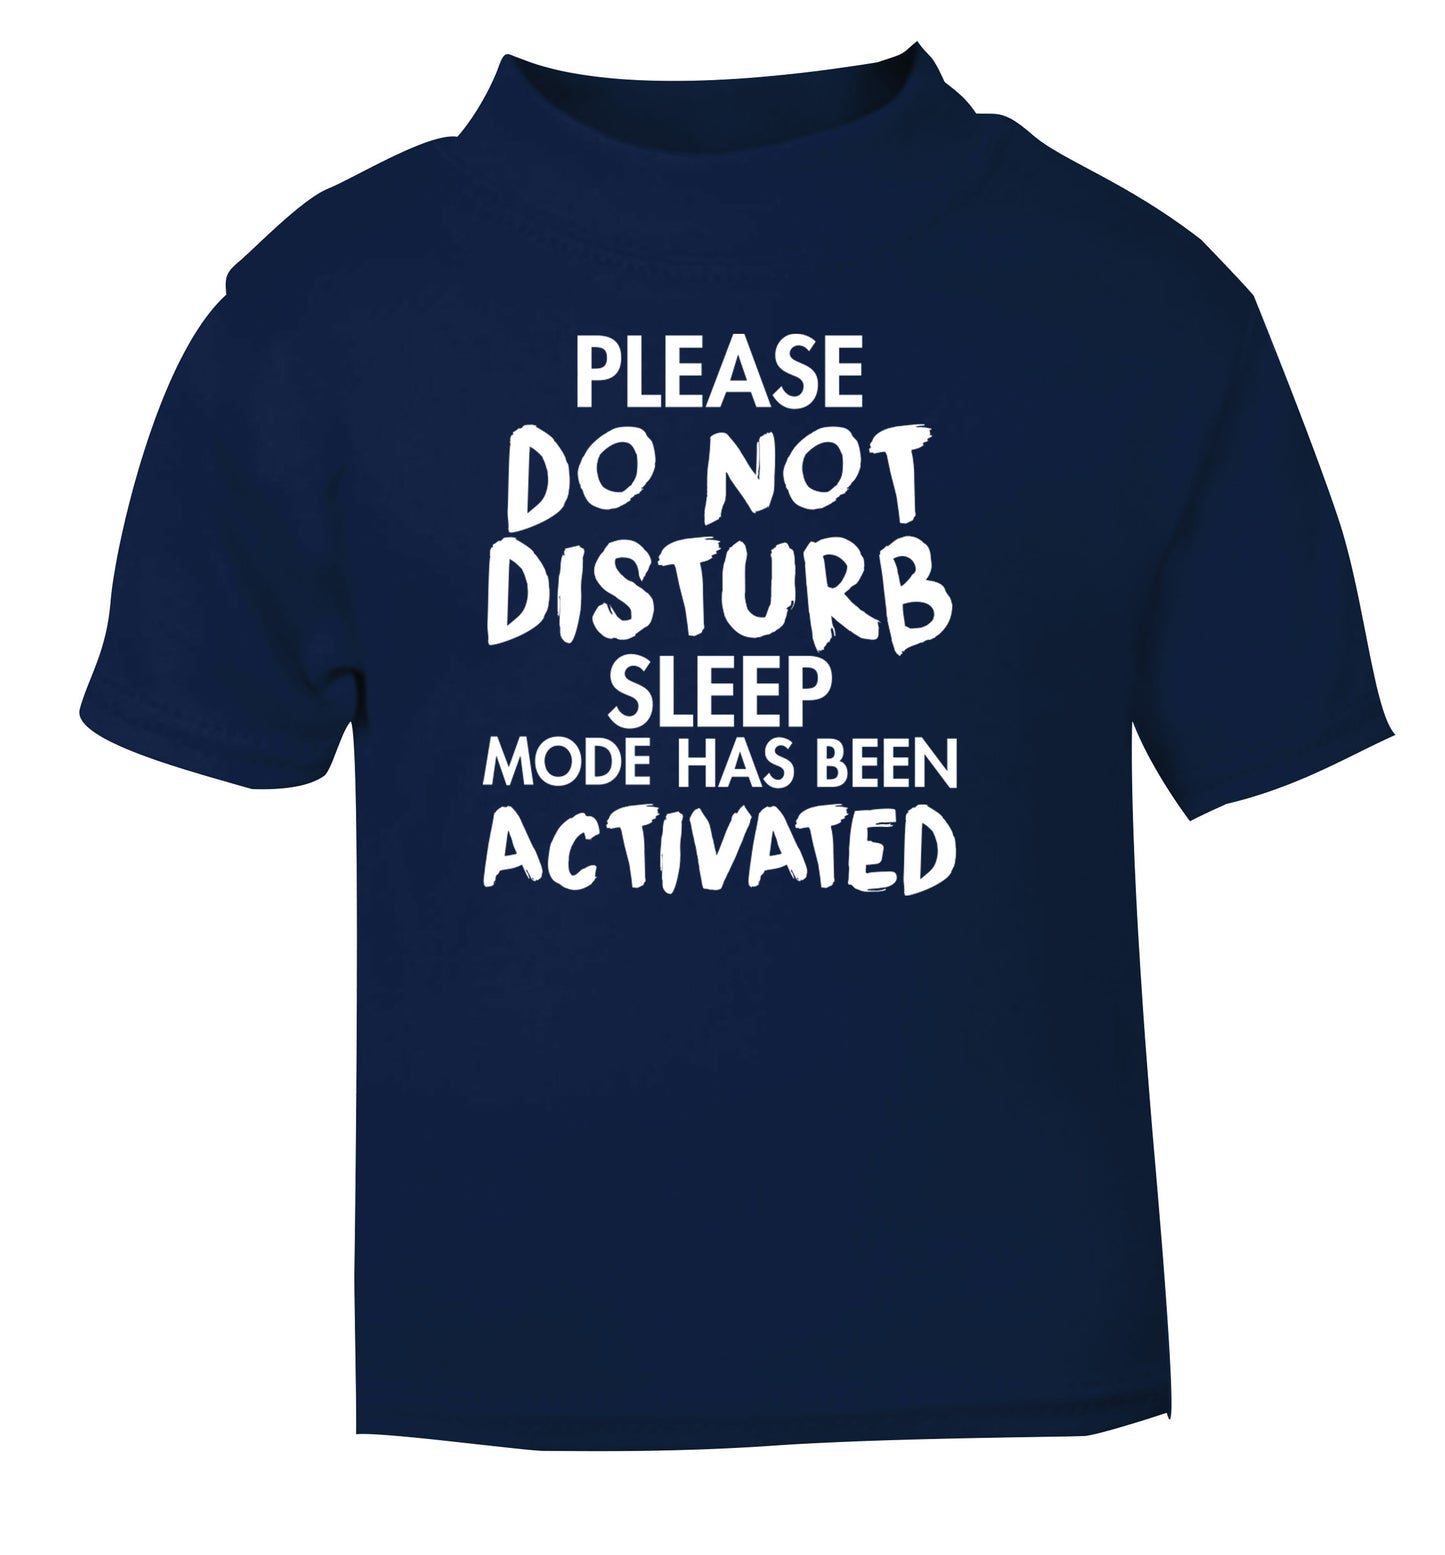 Please do not disturb sleeping mode has been activated navy Baby Toddler Tshirt 2 Years